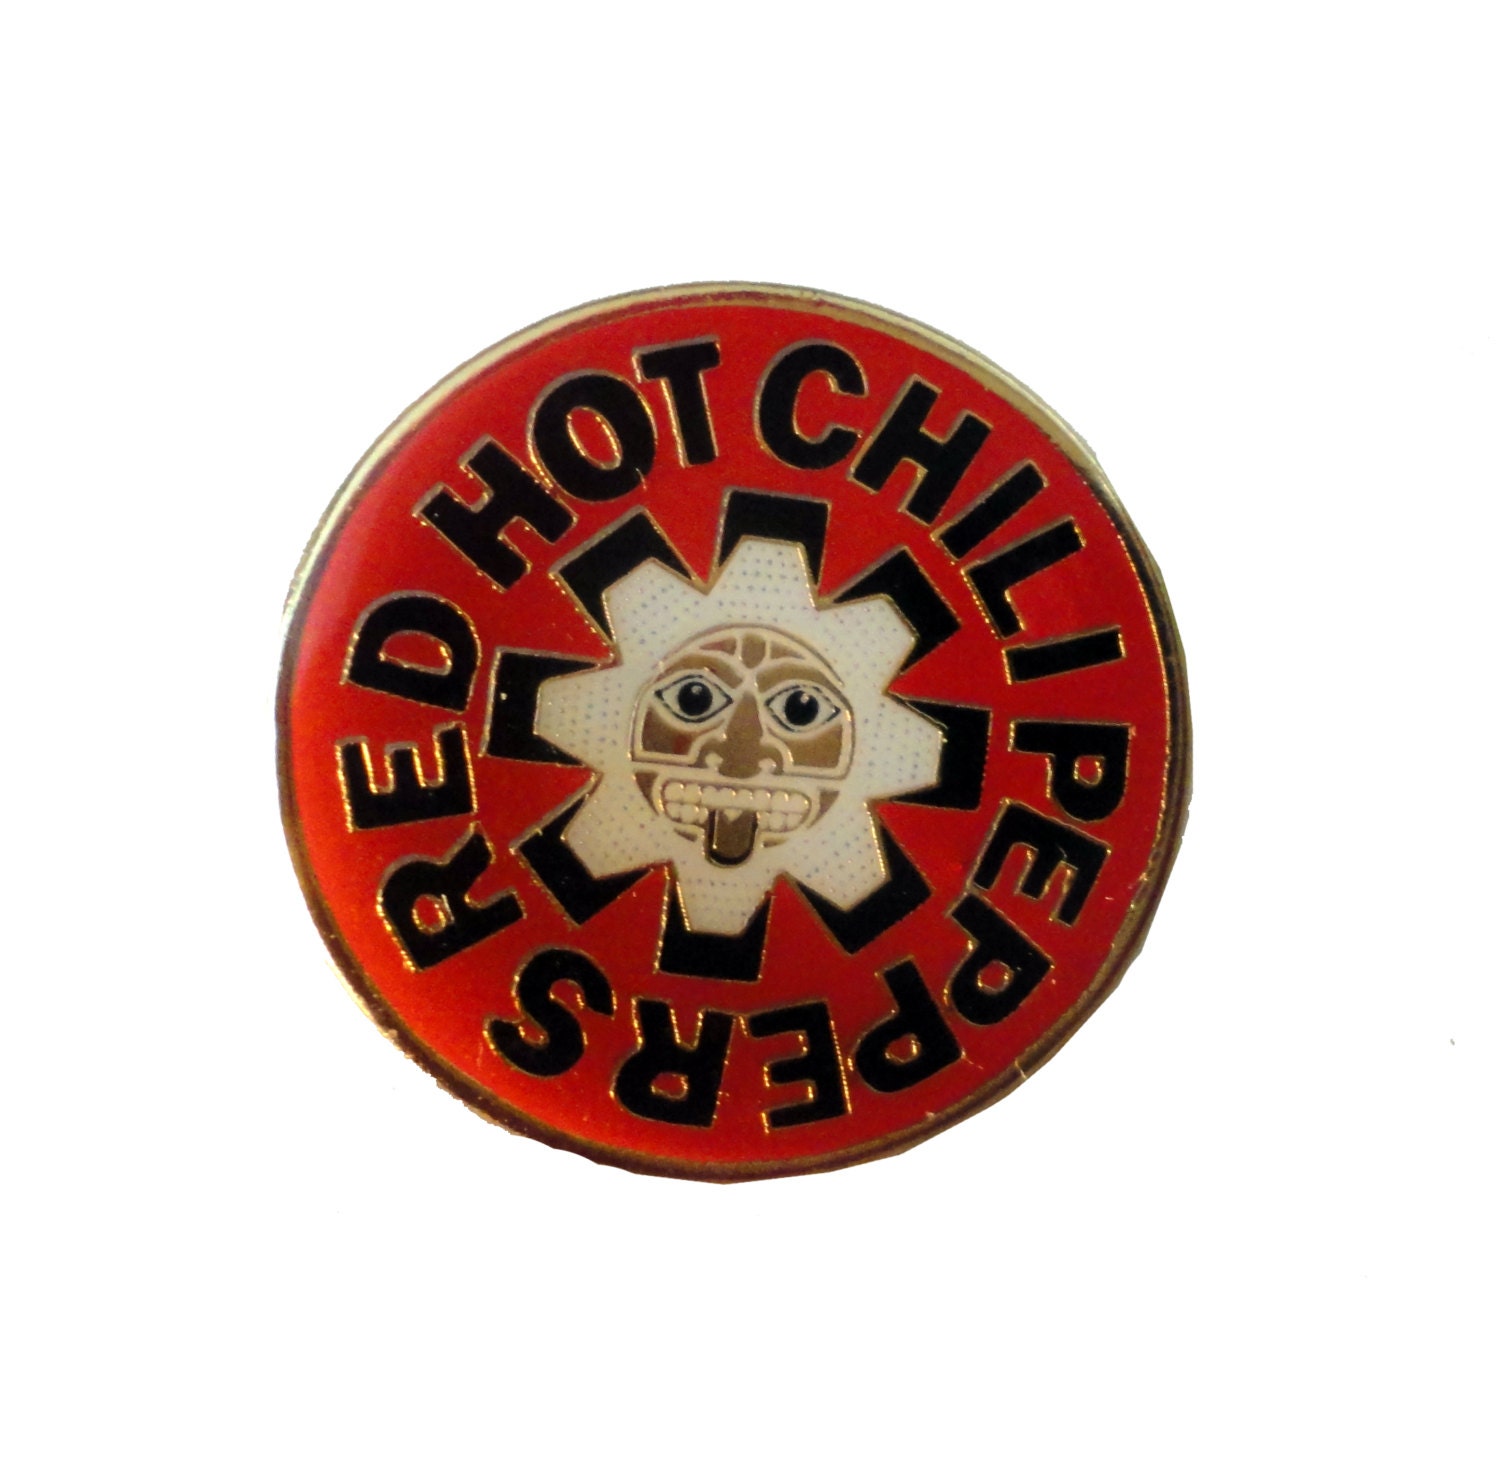 Vintage Red Hot Chili Peppers Enamel Pin Button Pinback Grunge